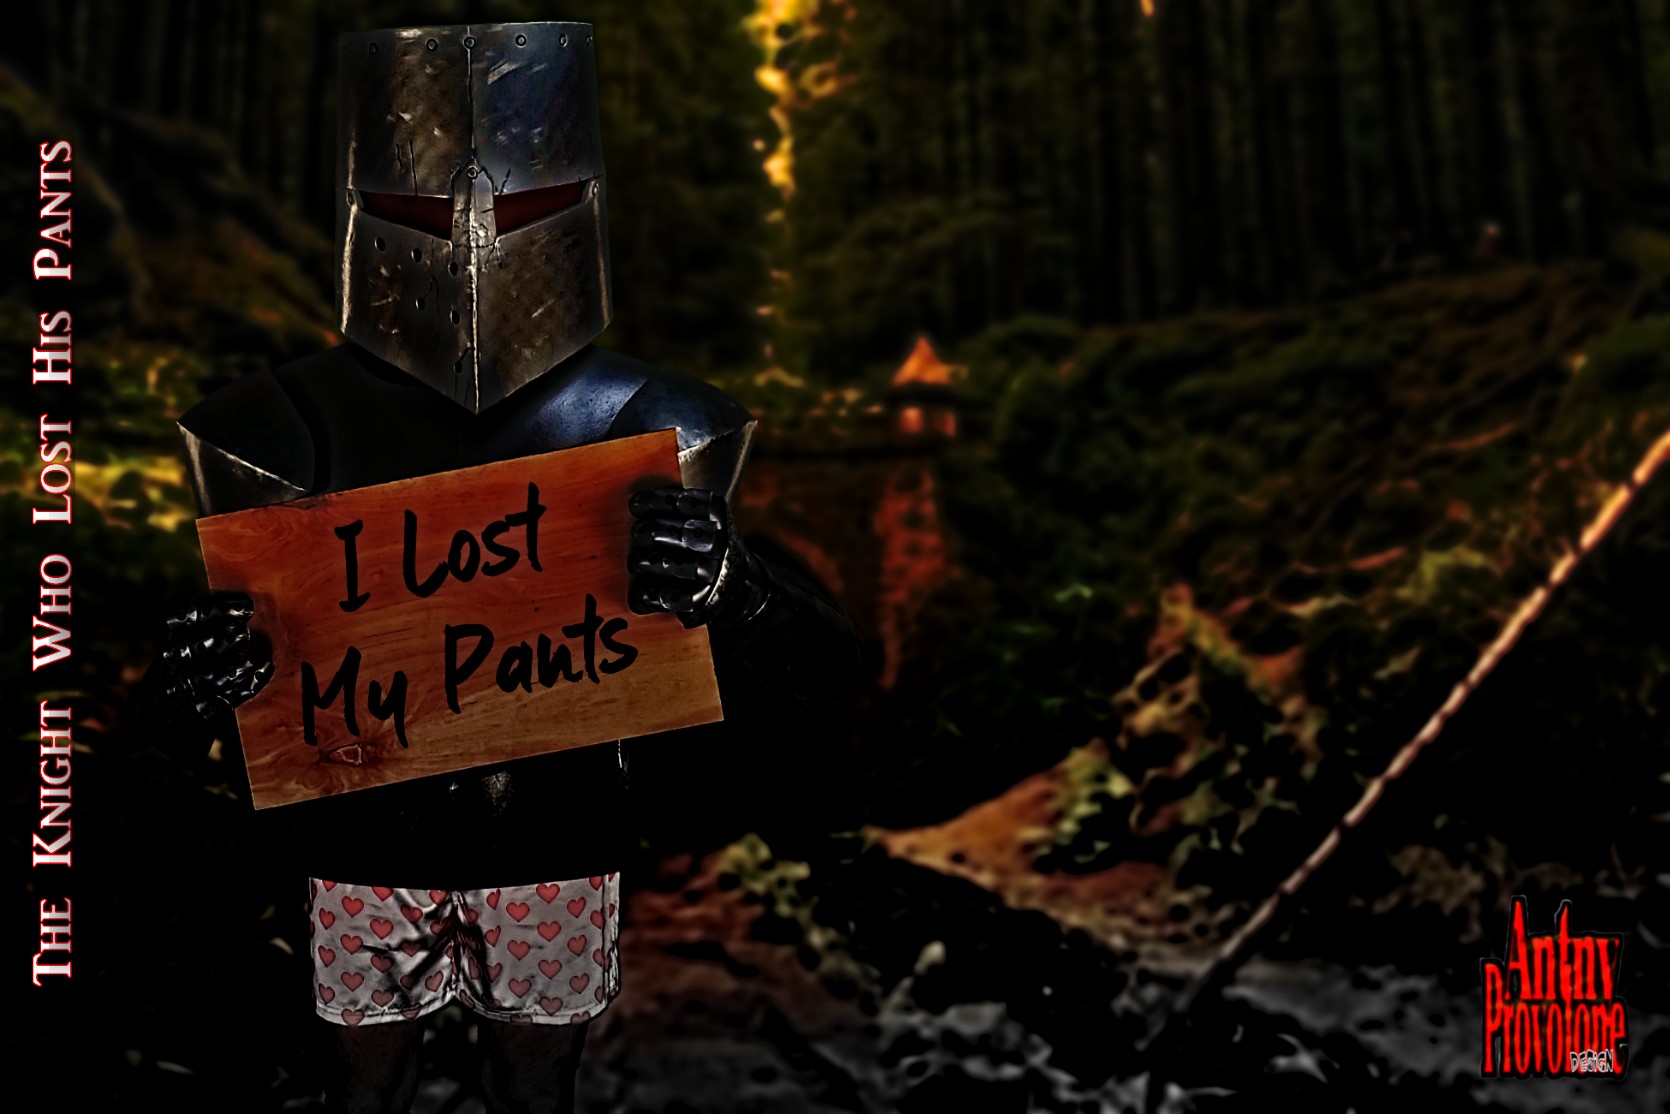 The Knight Who Lost His Pants